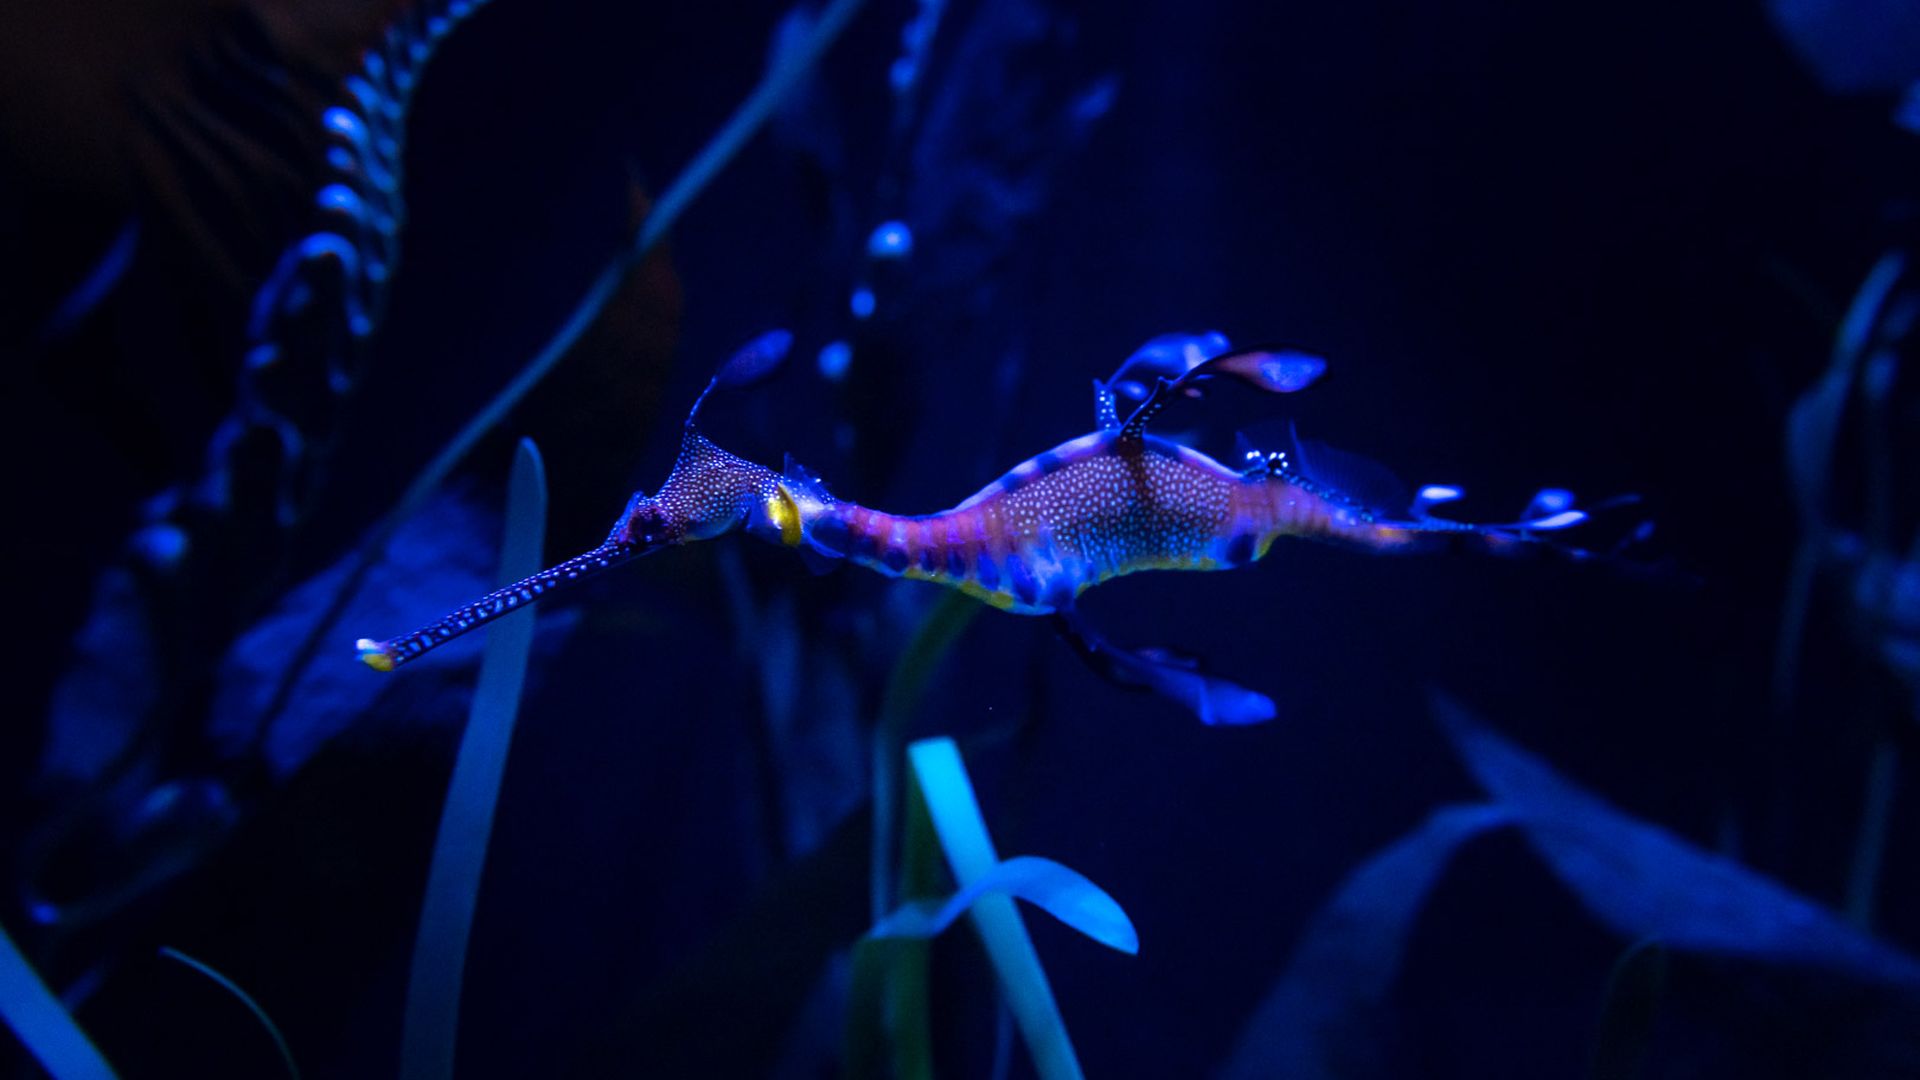 A close-up of a purple and blue weedy sea dragon